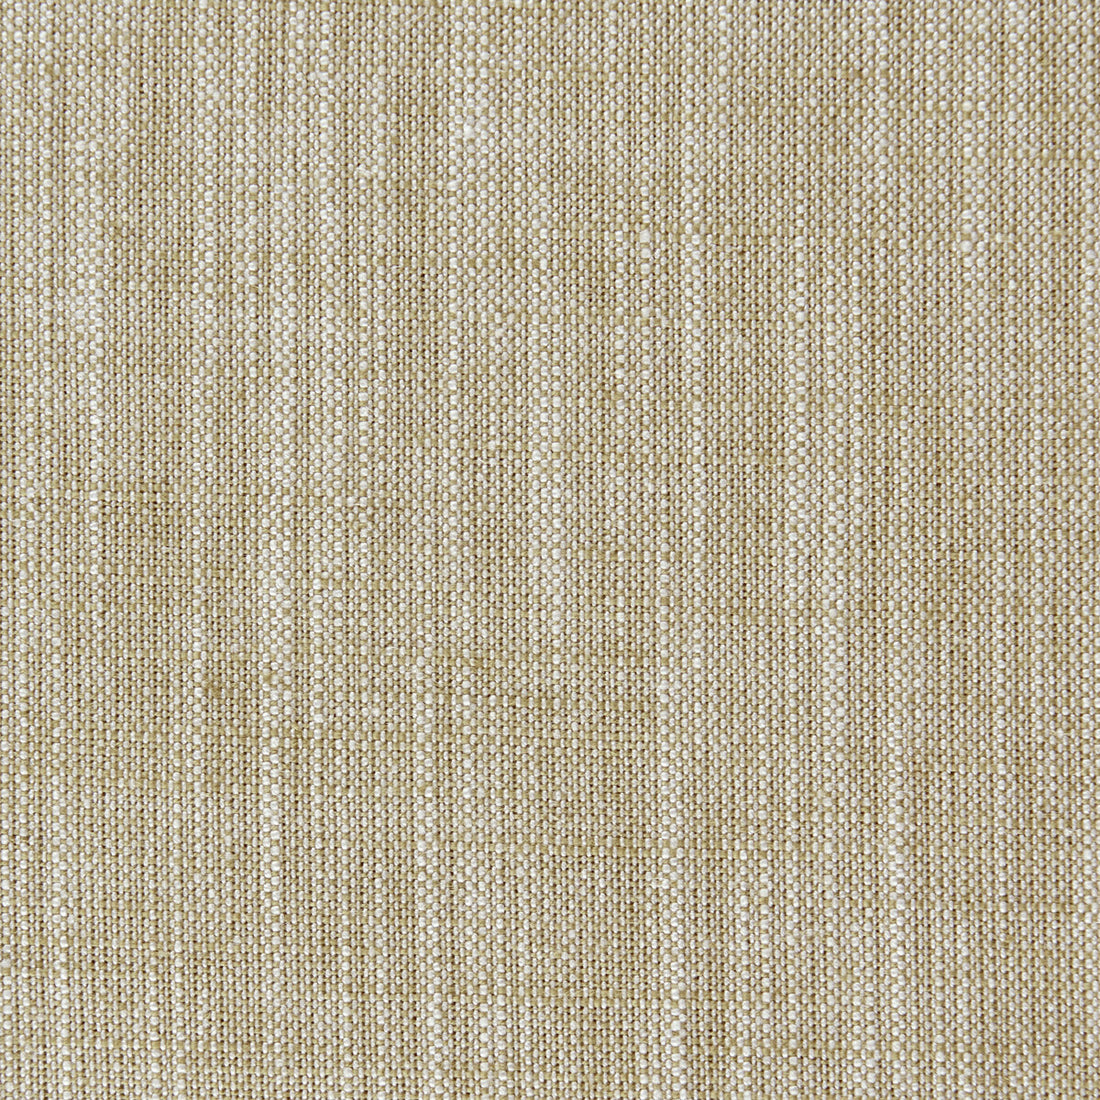 Biarritz fabric in bamboo color - pattern F0965/04.CAC.0 - by Clarke And Clarke in the Clarke &amp; Clarke Biarritz collection